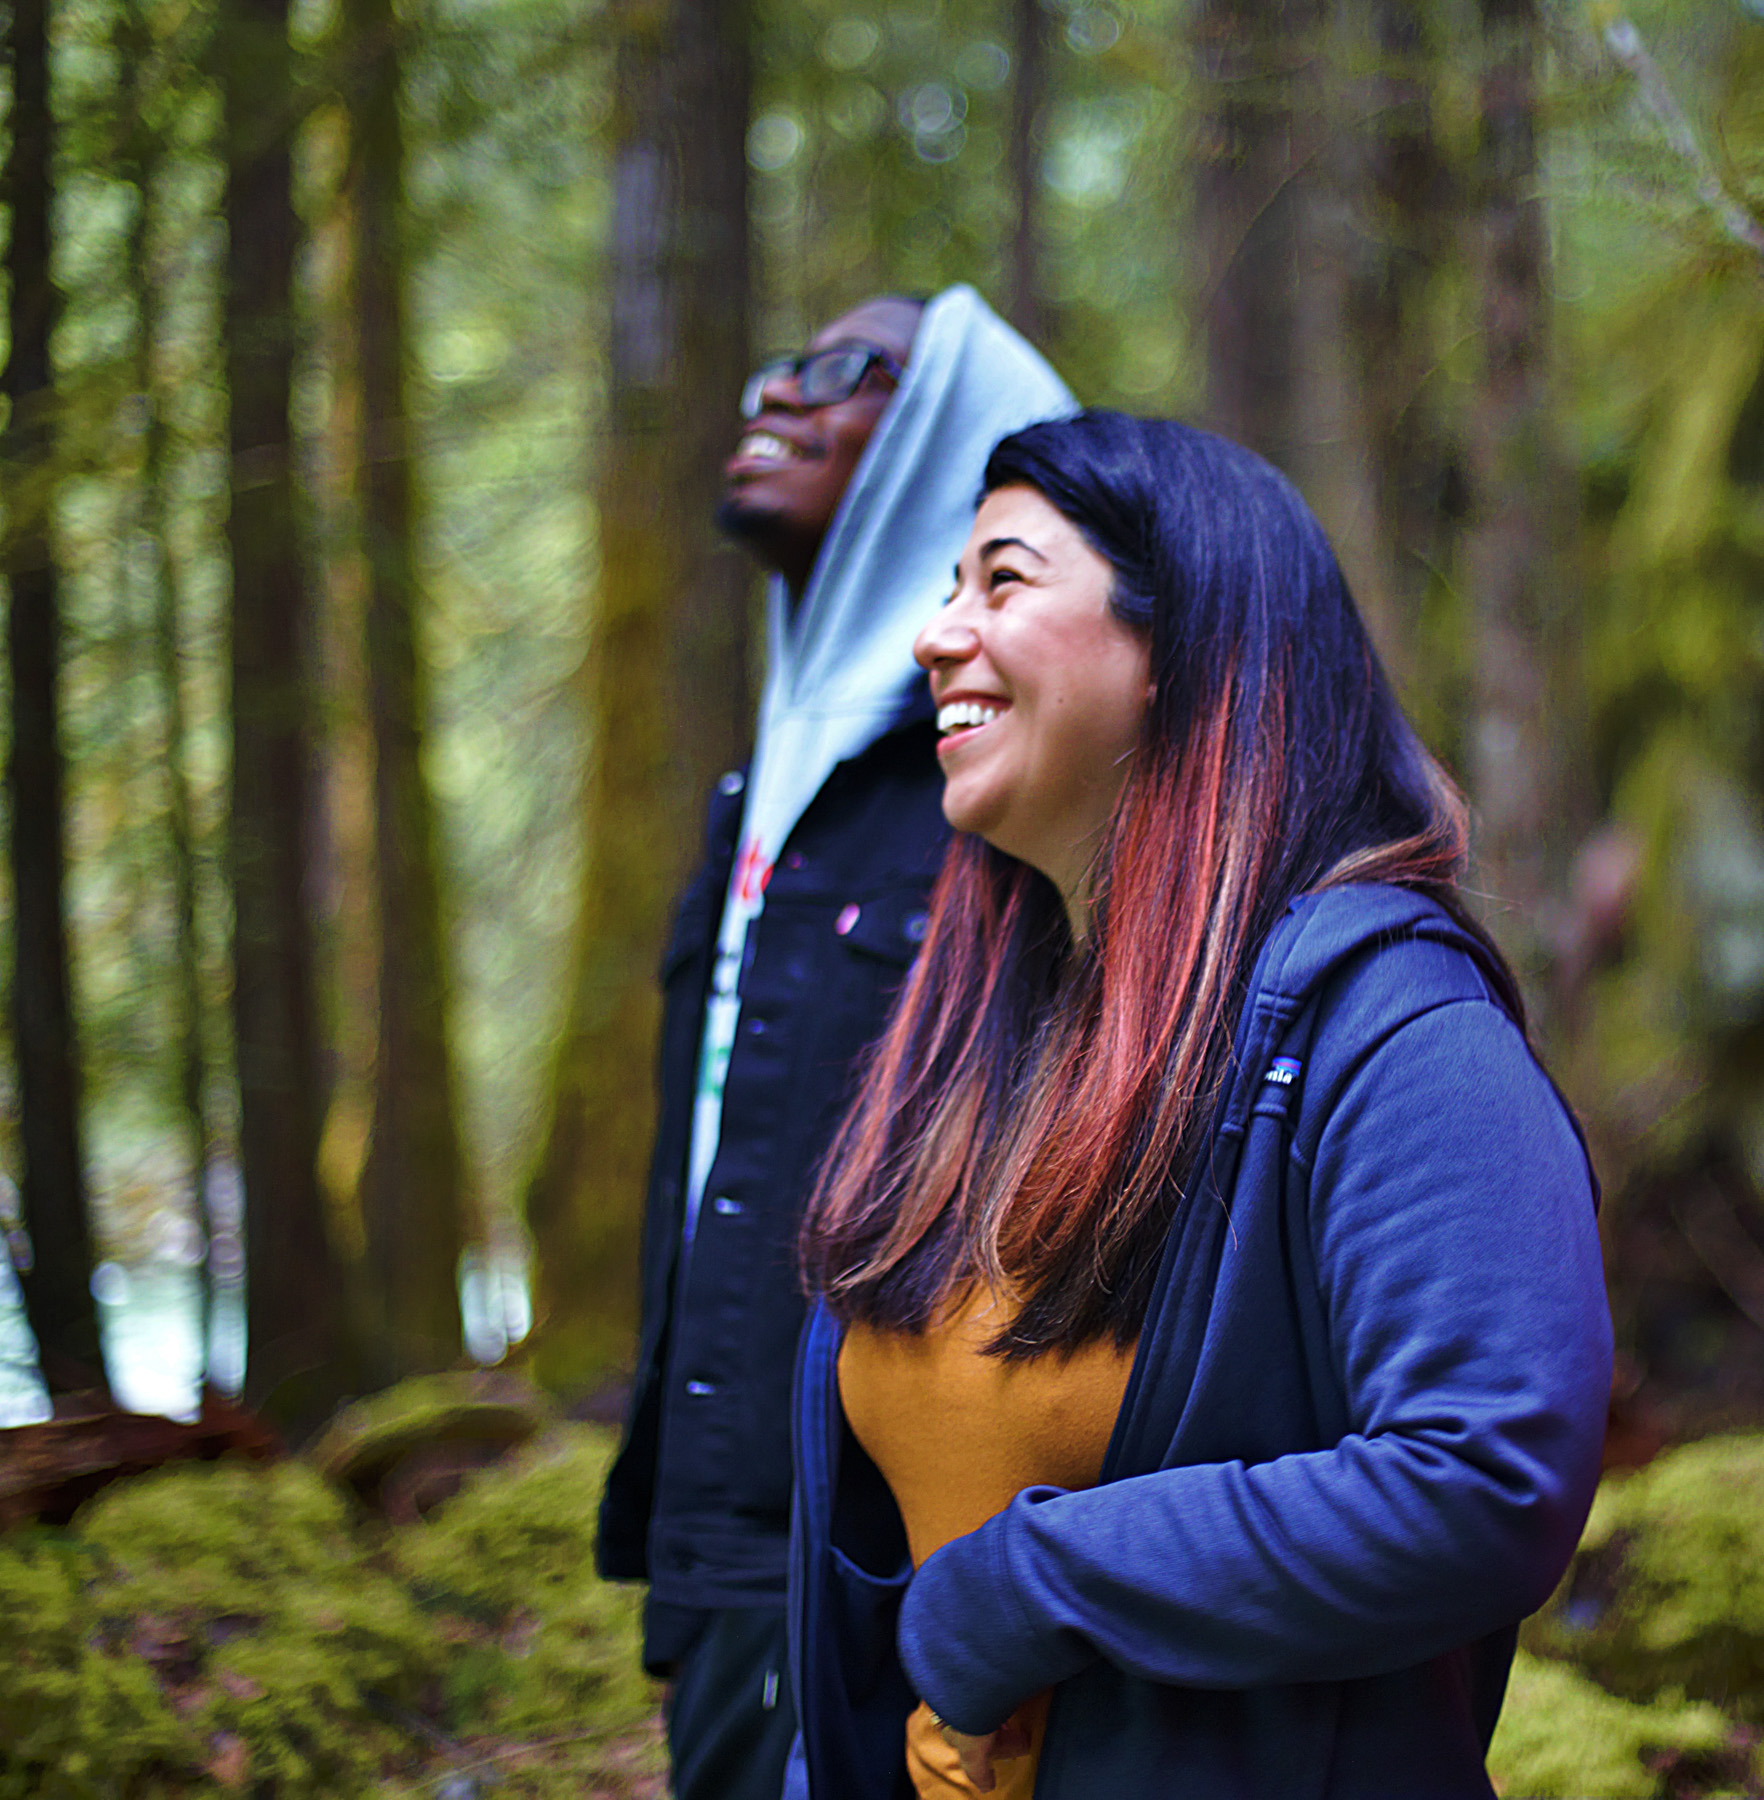 Two people laughing in the forest.